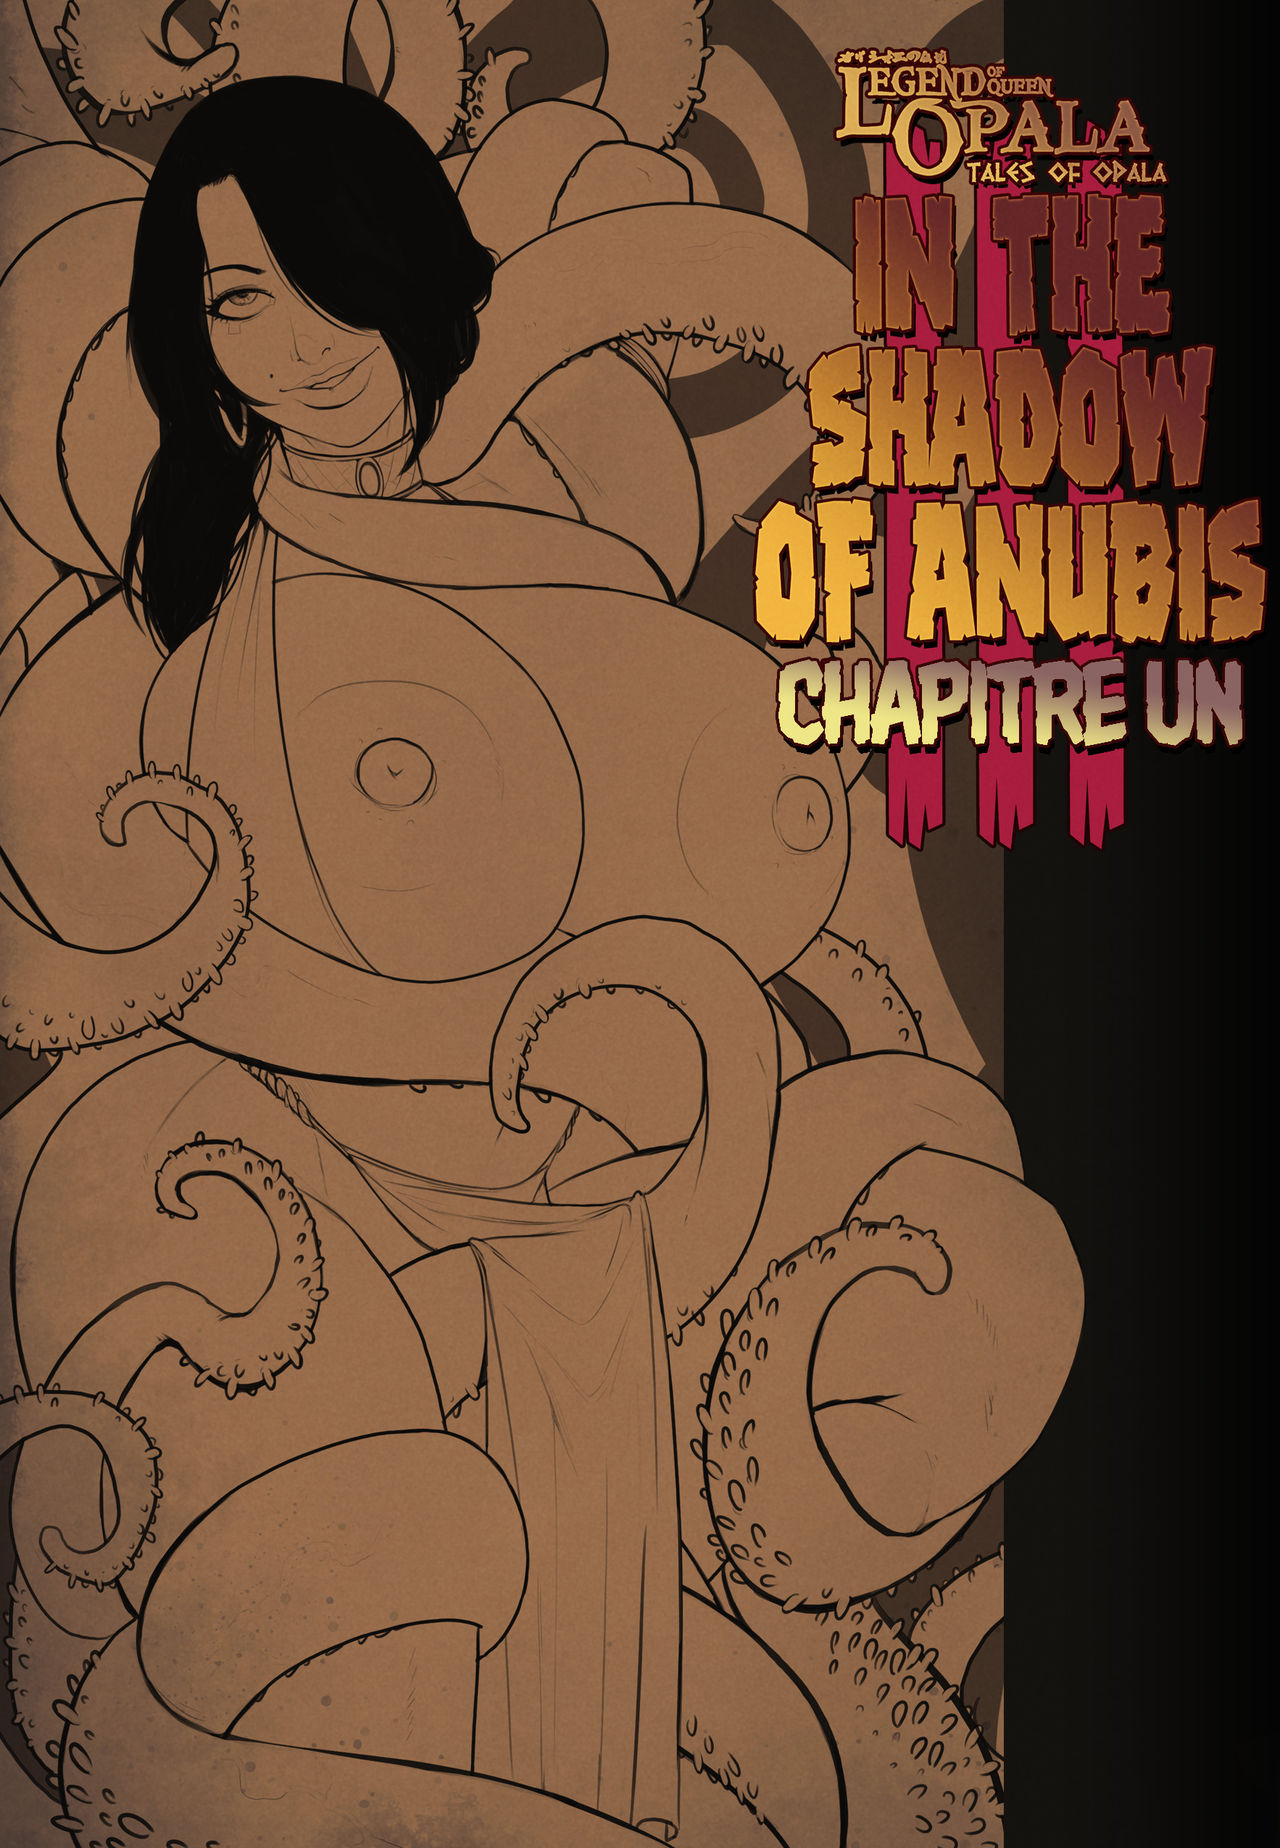 Legend of queen Opala - In the shadow of anubis Chapitre un